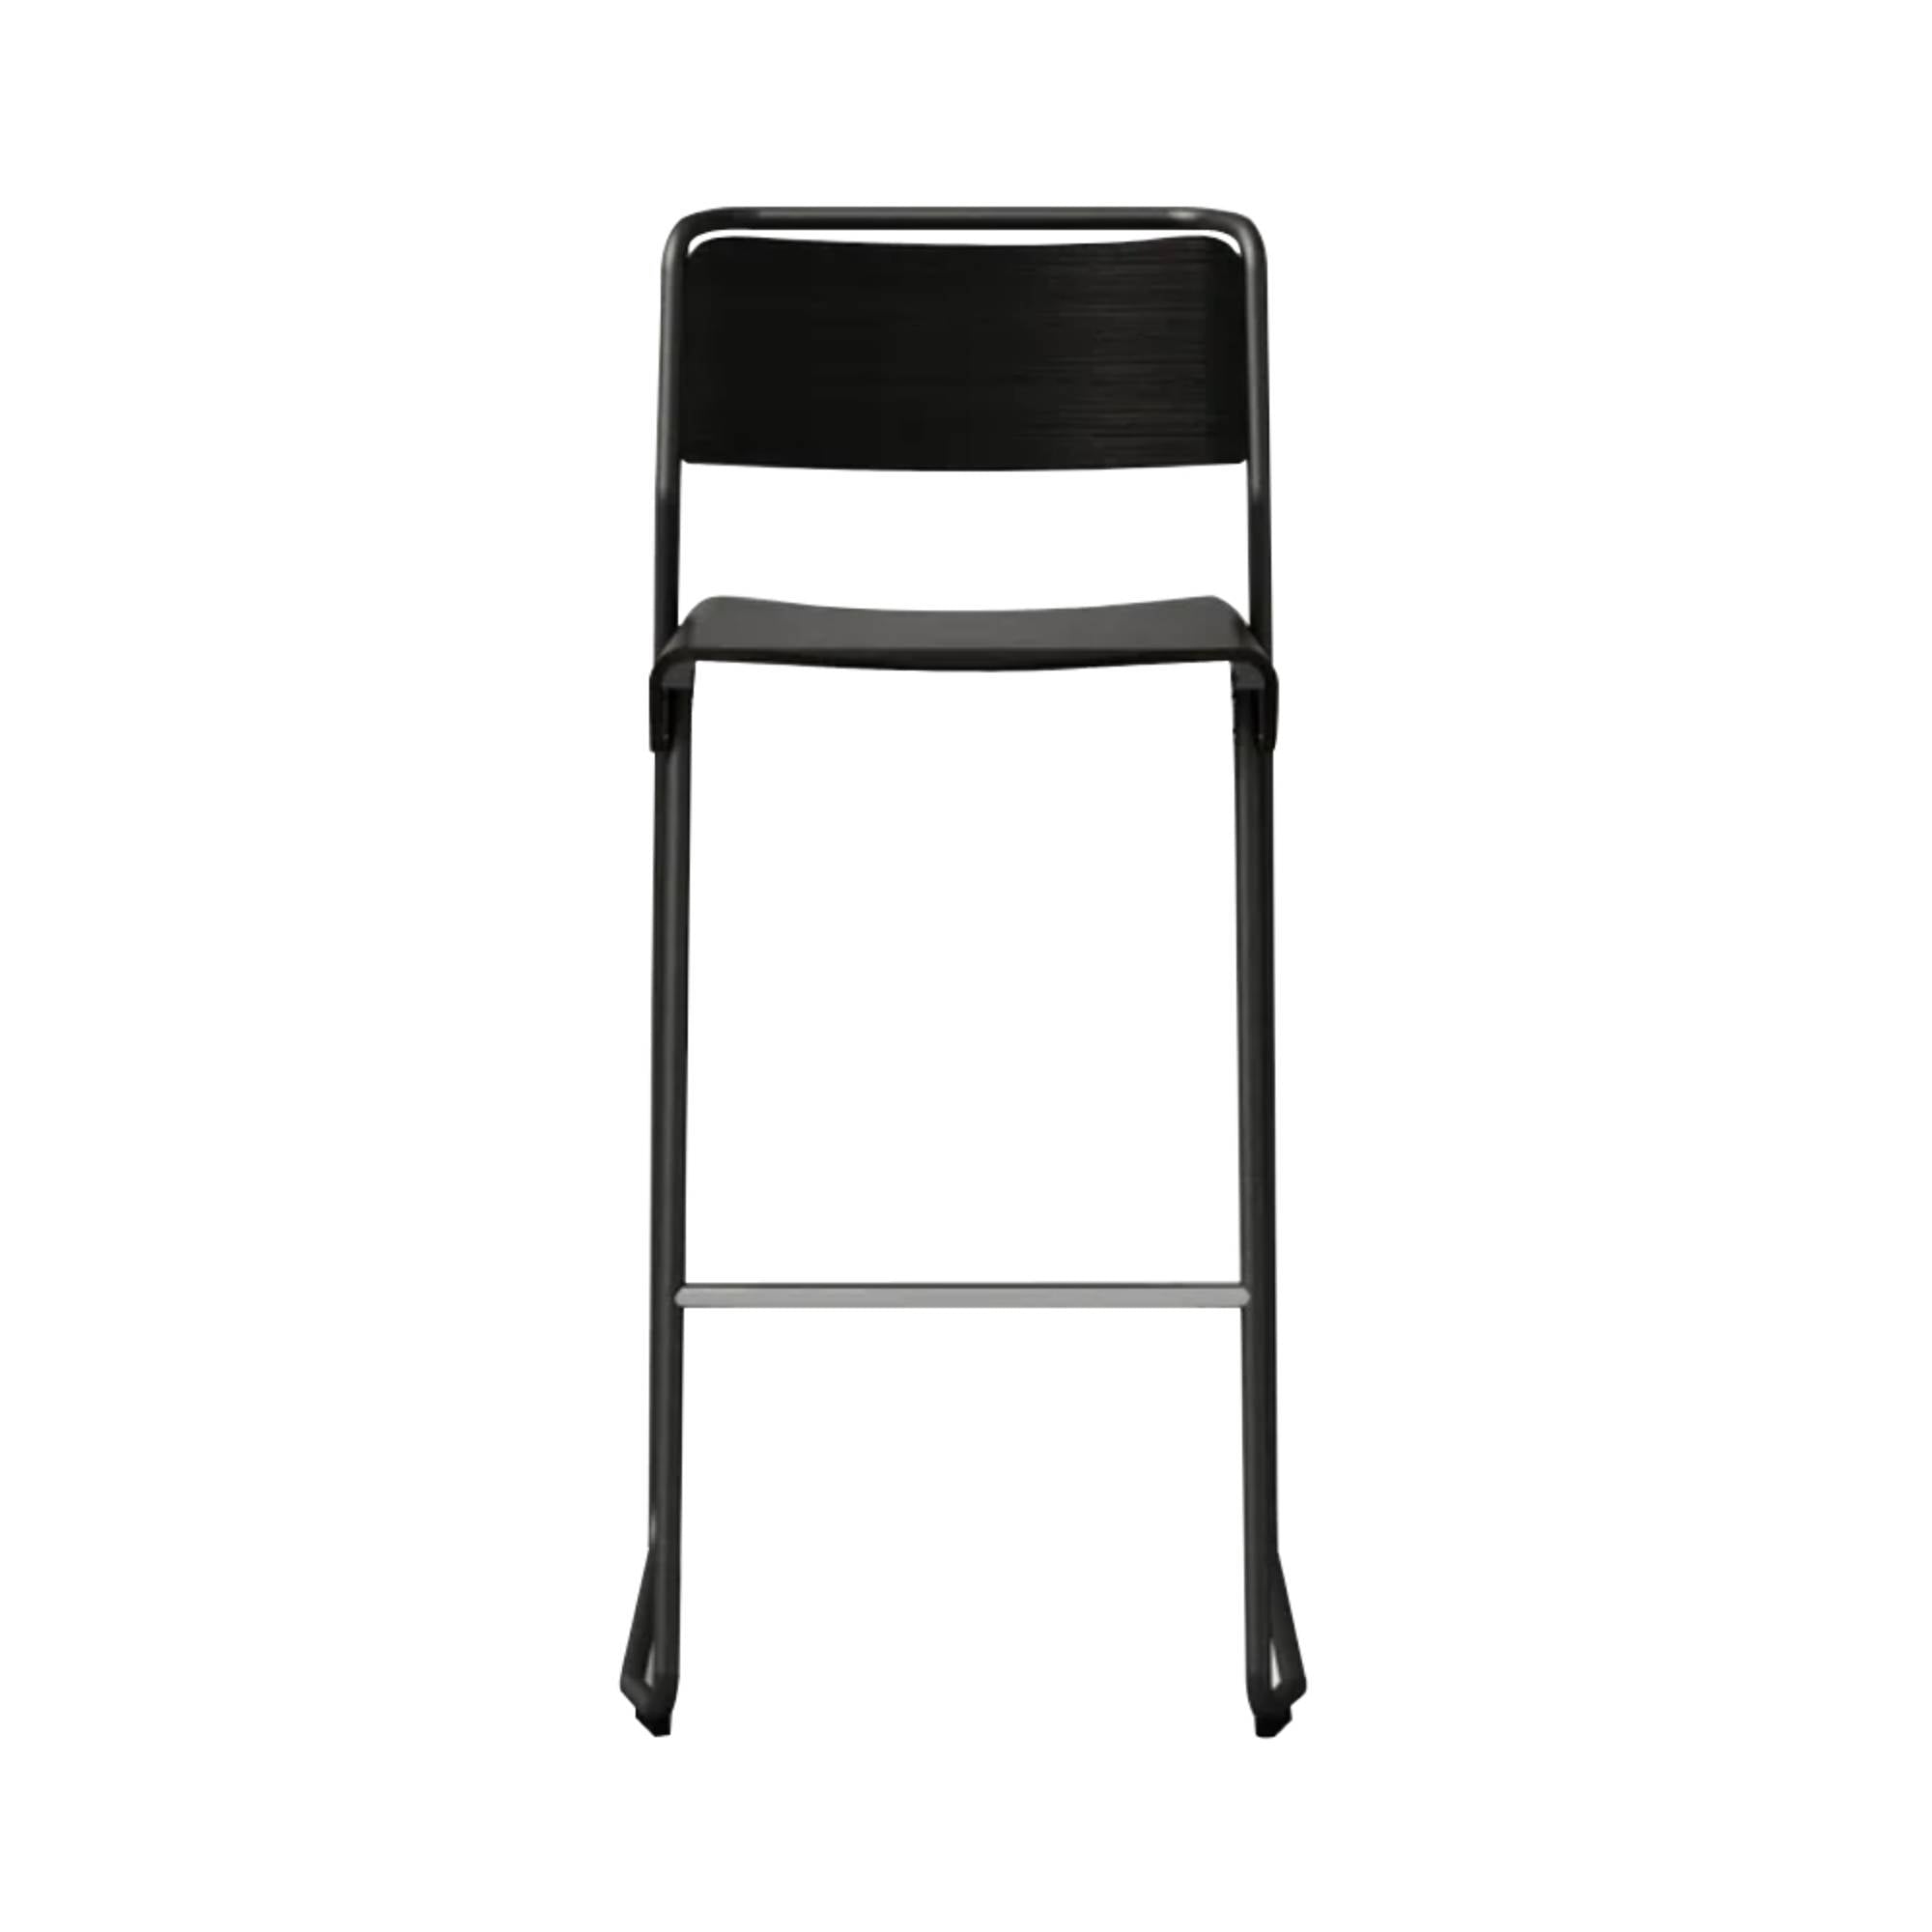 Canteen Utility High Stool: Graphite + Graphite